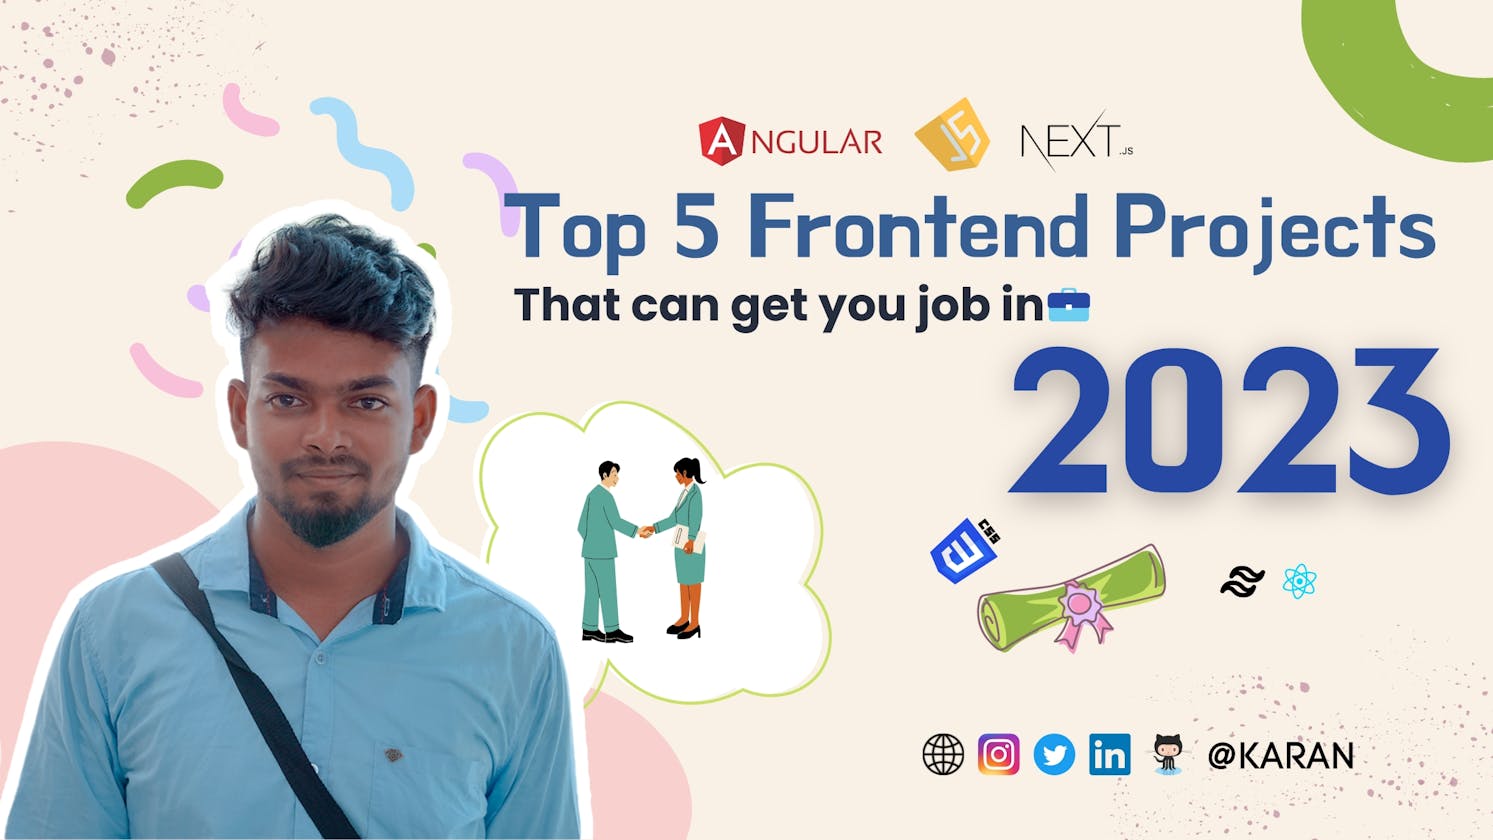 Top 5 Frontend Projects that can get you job in 2023